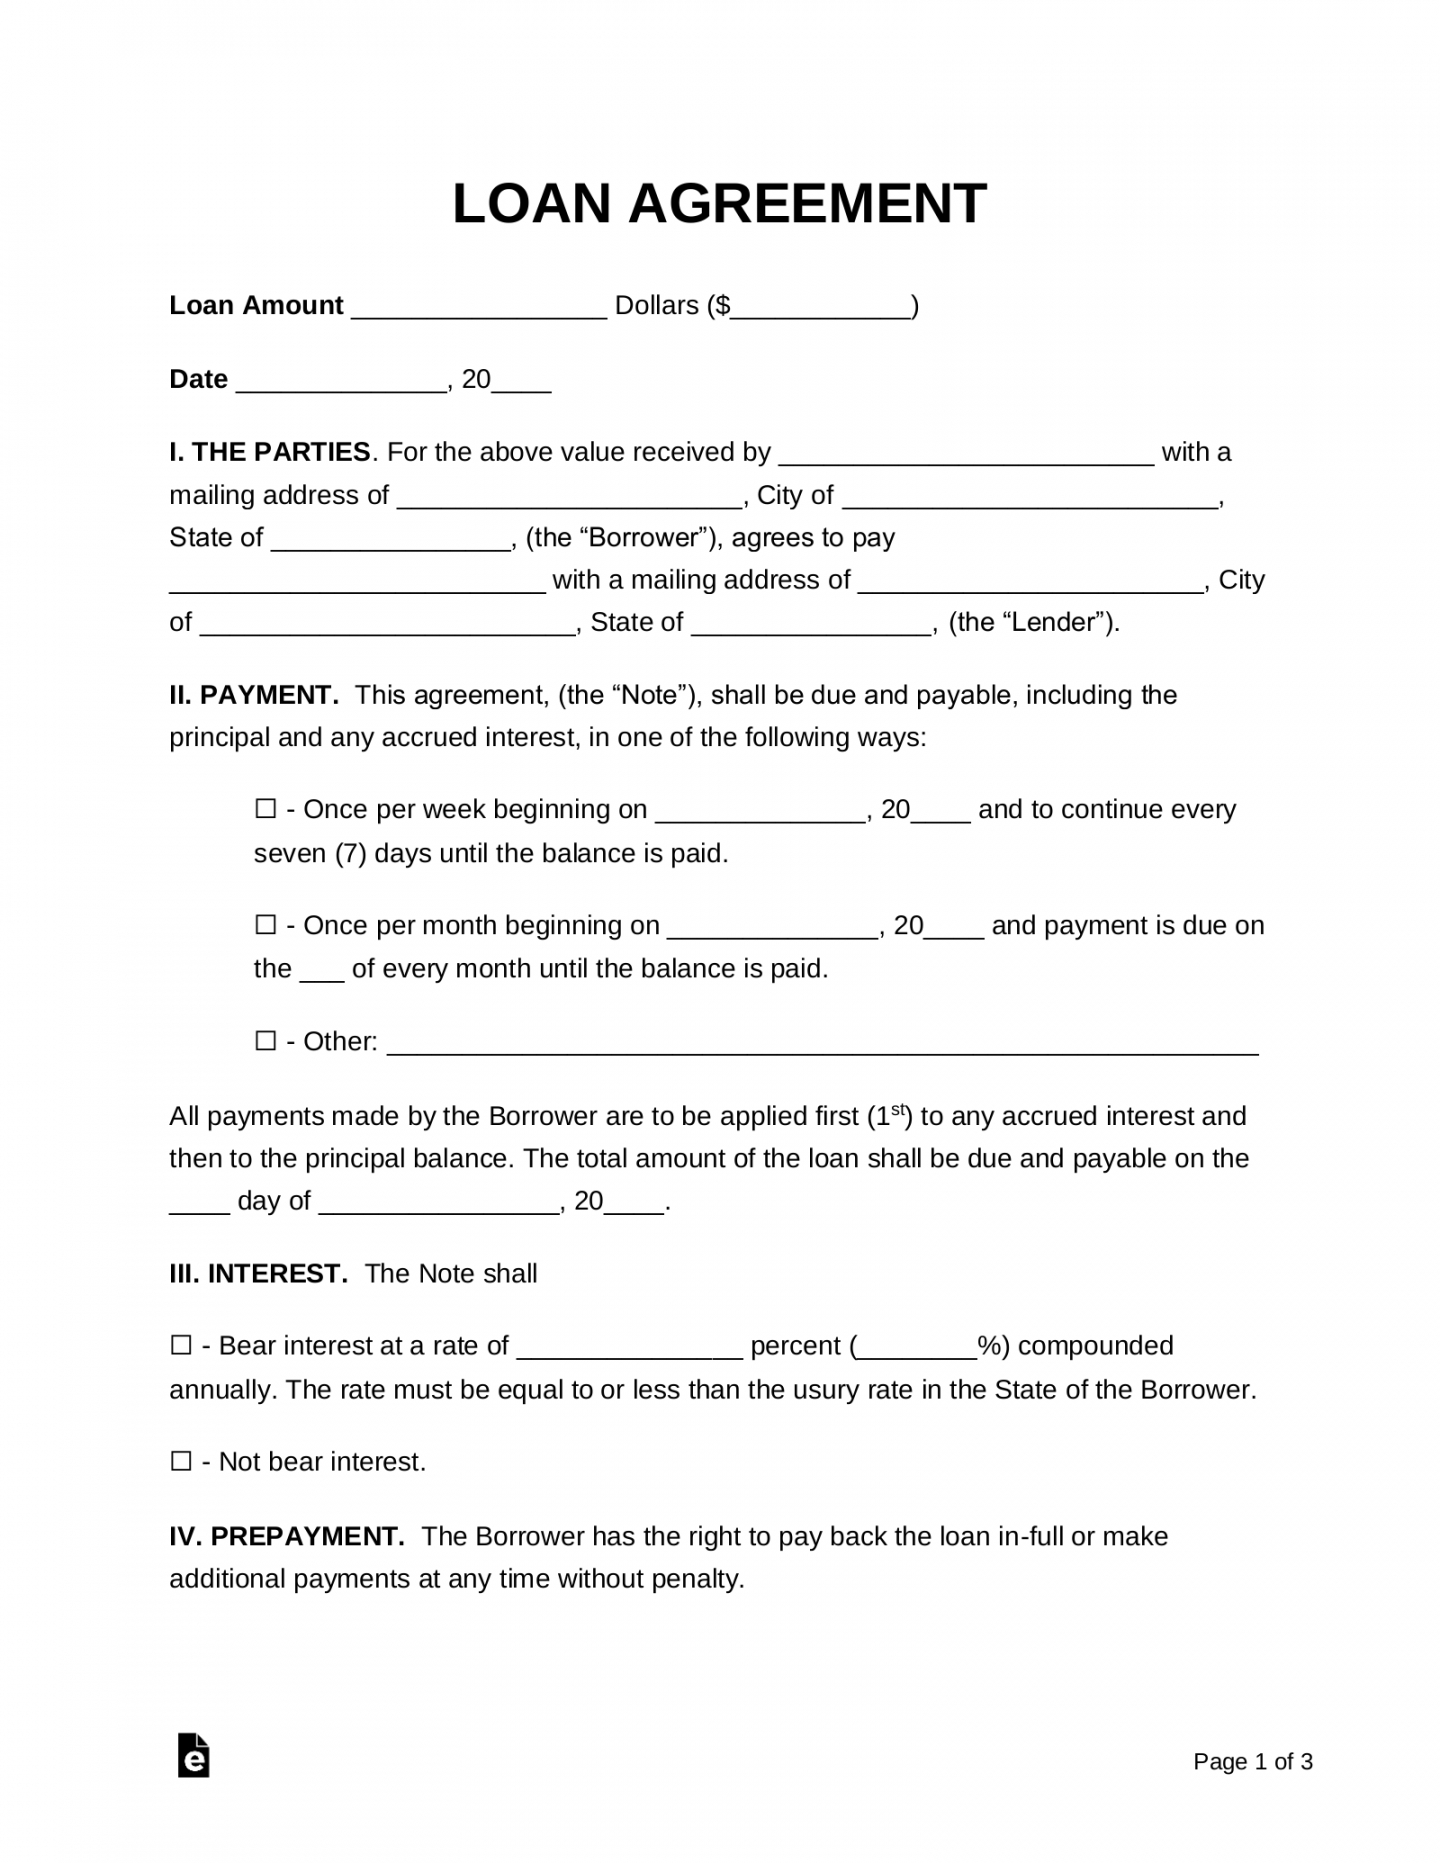 editable free loan agreement templates  pdf  word  eforms promissory note template nevada doc